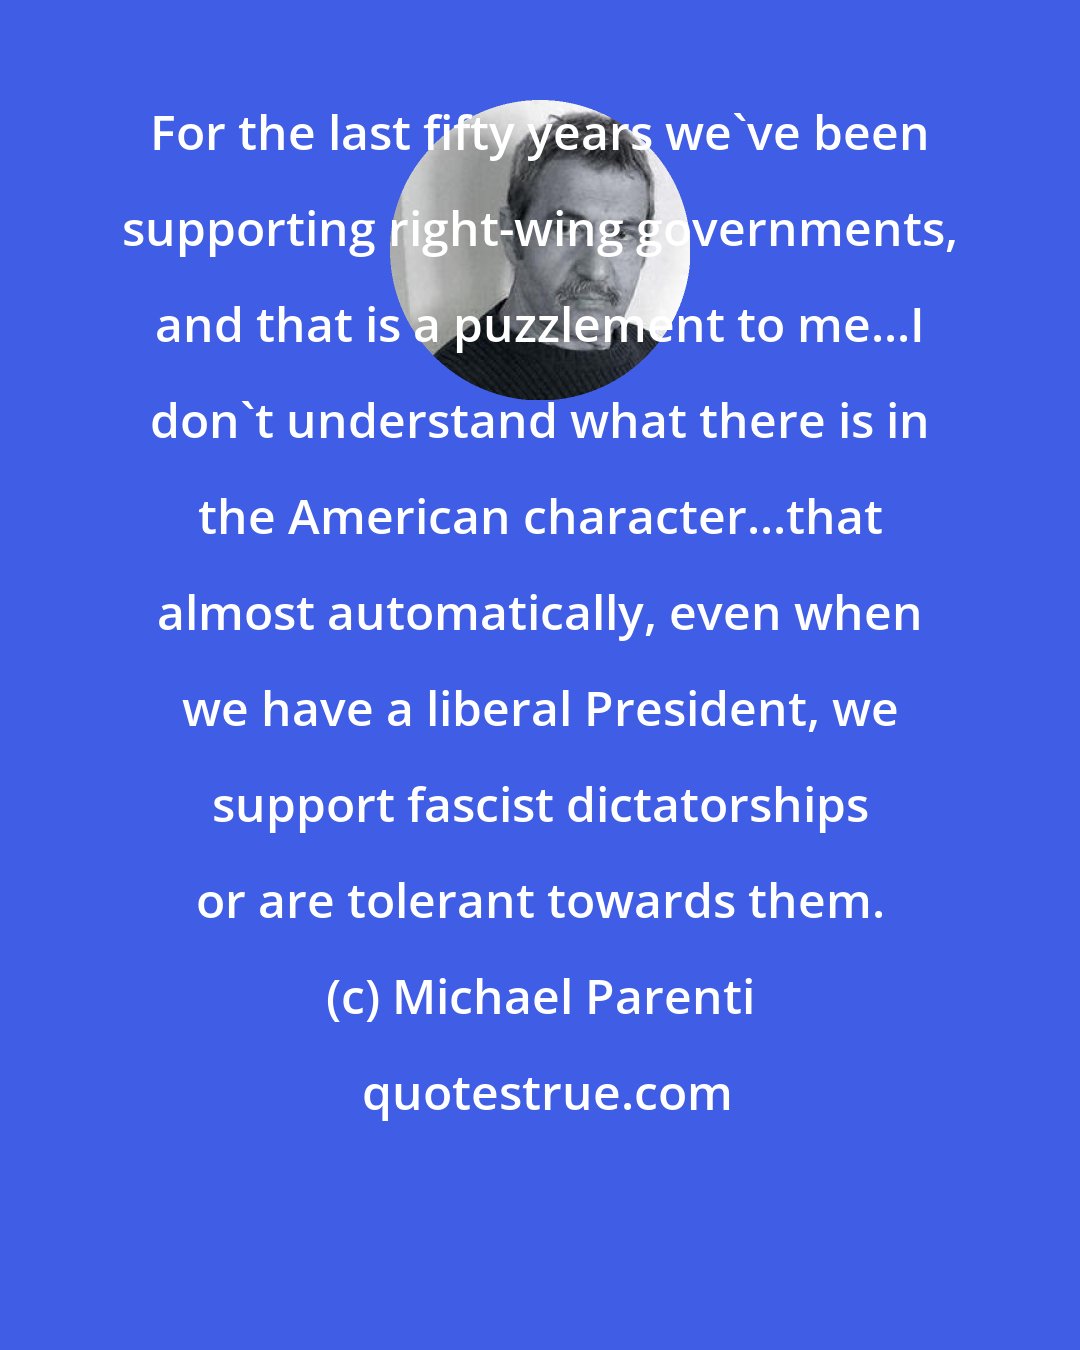 Michael Parenti: For the last fifty years we've been supporting right-wing governments, and that is a puzzlement to me...I don't understand what there is in the American character...that almost automatically, even when we have a liberal President, we support fascist dictatorships or are tolerant towards them.